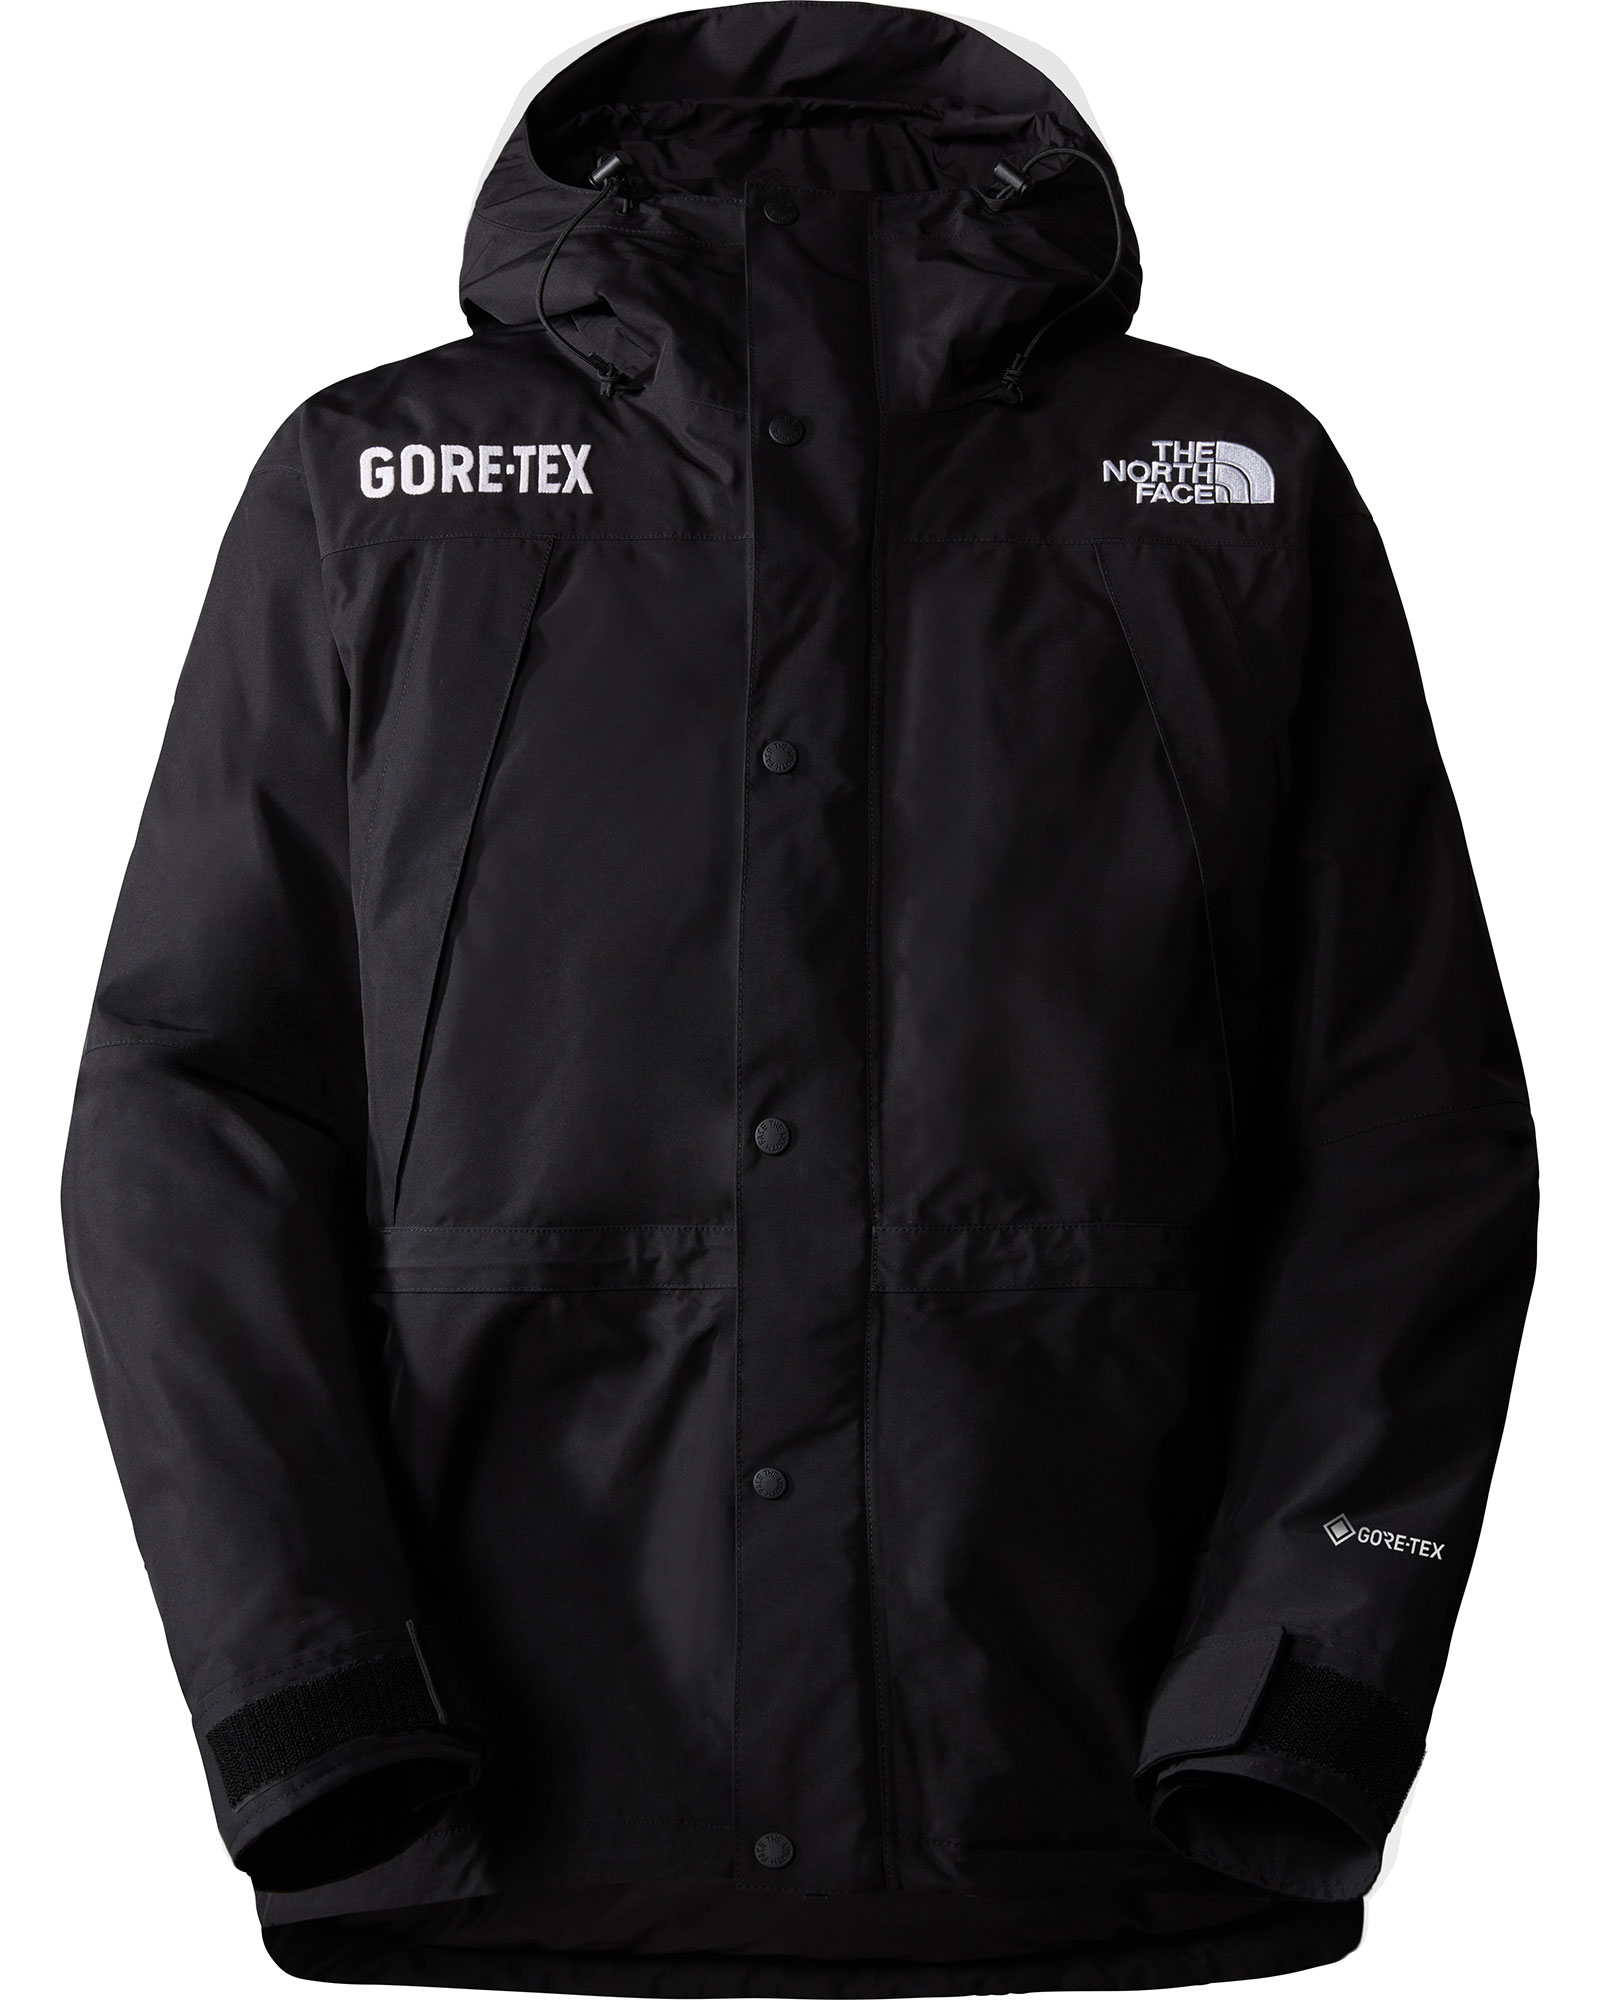 The North Face Men’s Mountain Guide Insulated GORE TEX Jacket - TNF Black M